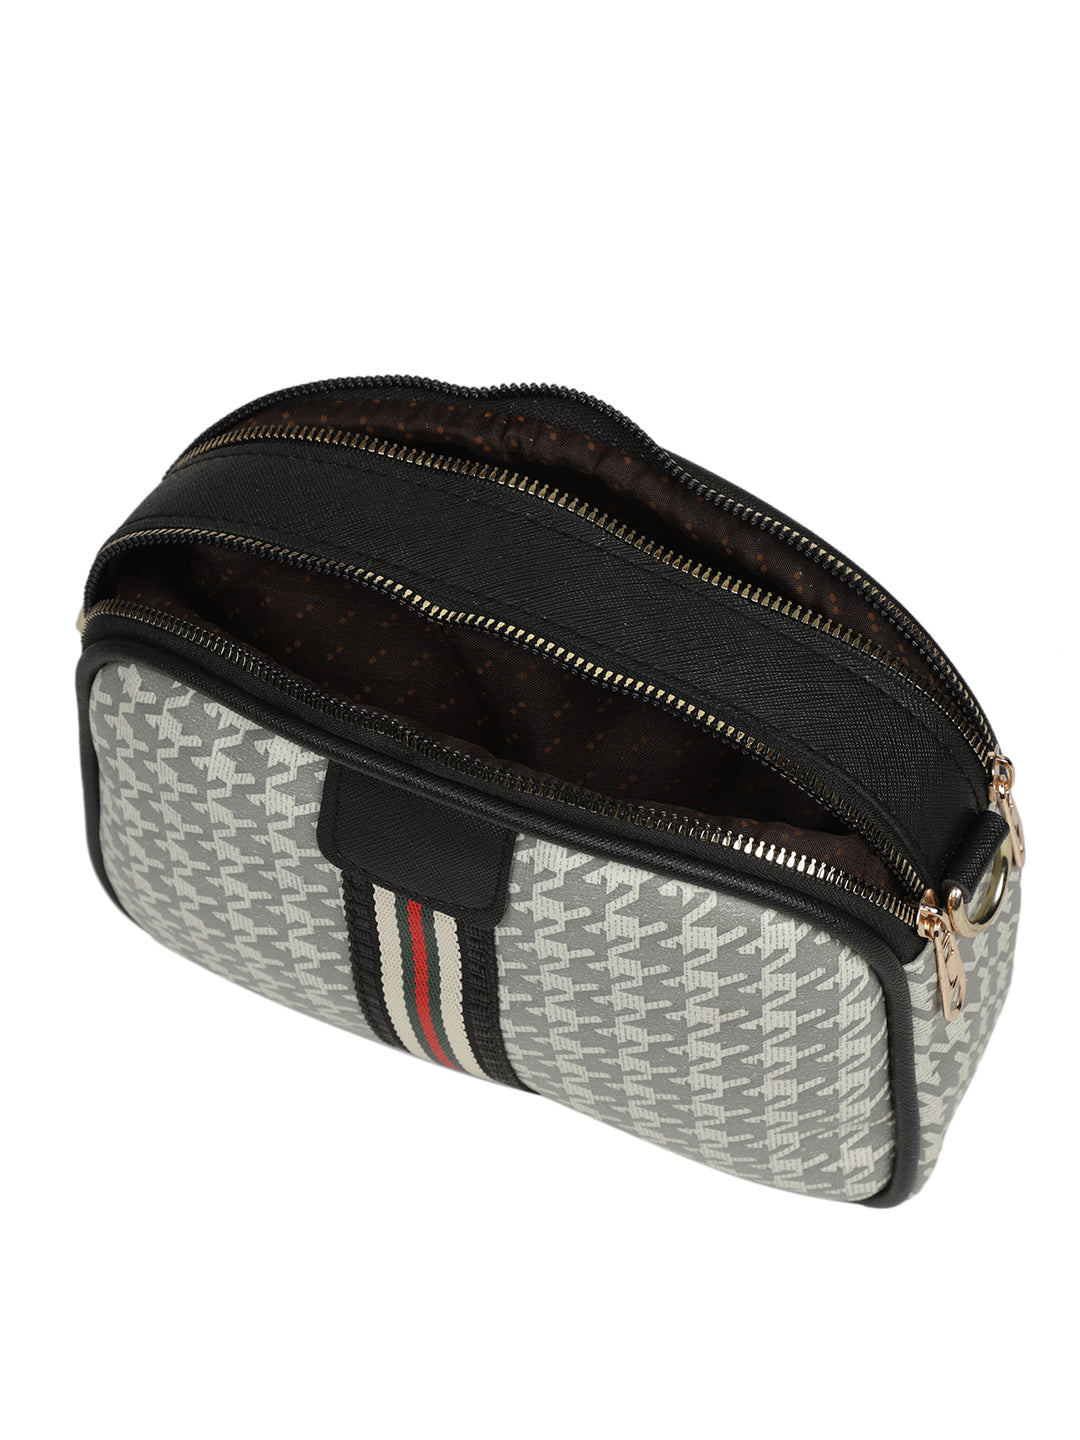 MINI WESST Grey Casual Checked Sling Bag(MWHB133GY)